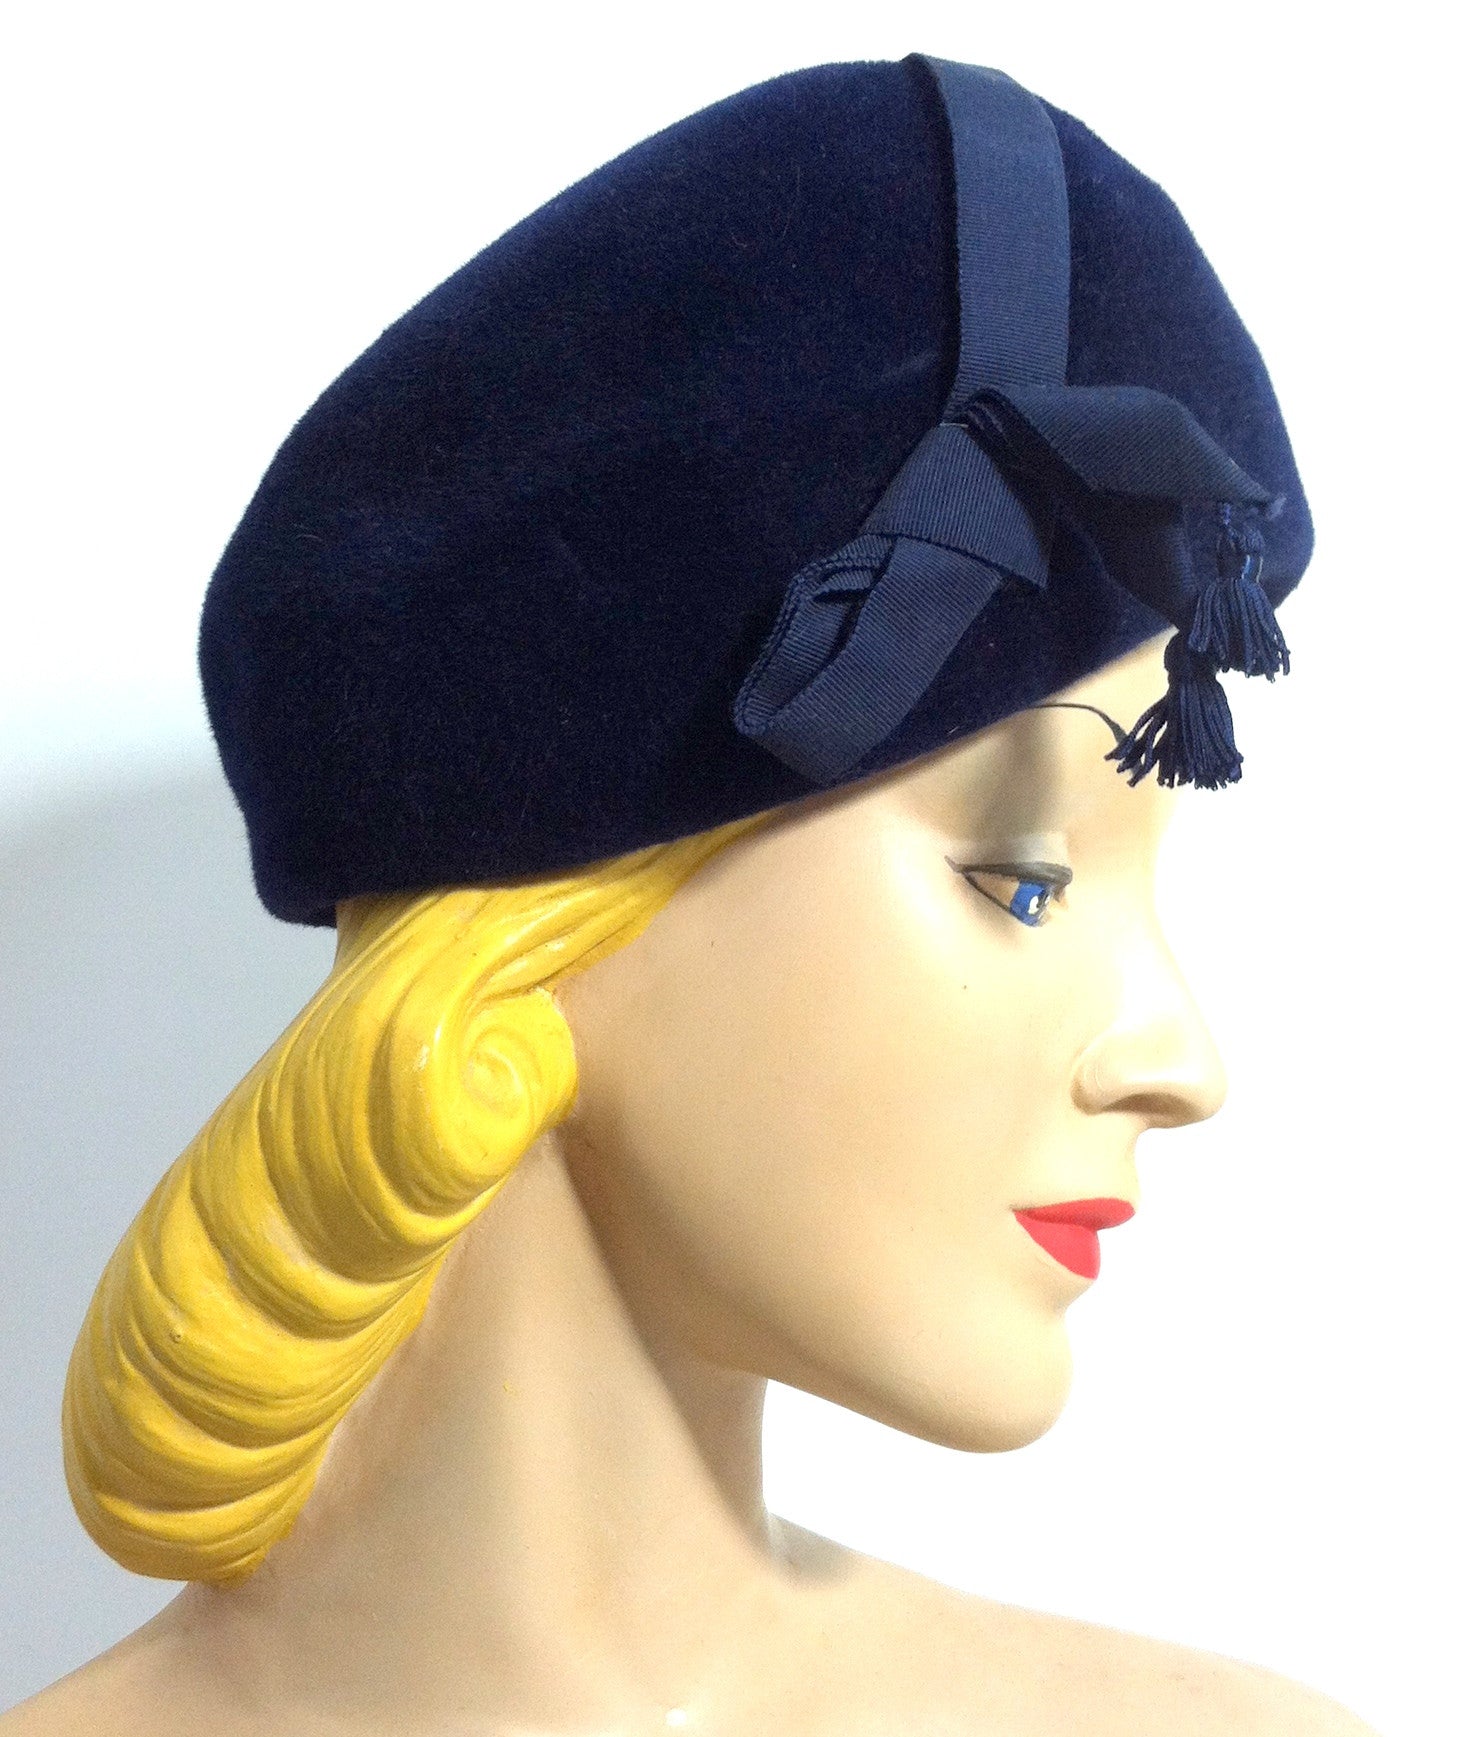 Rounded L'Heuere Bleue Rounded Velvet Hat with Ribbon and Tassel circa 1960s Dorothea's Closet Vintage Hat